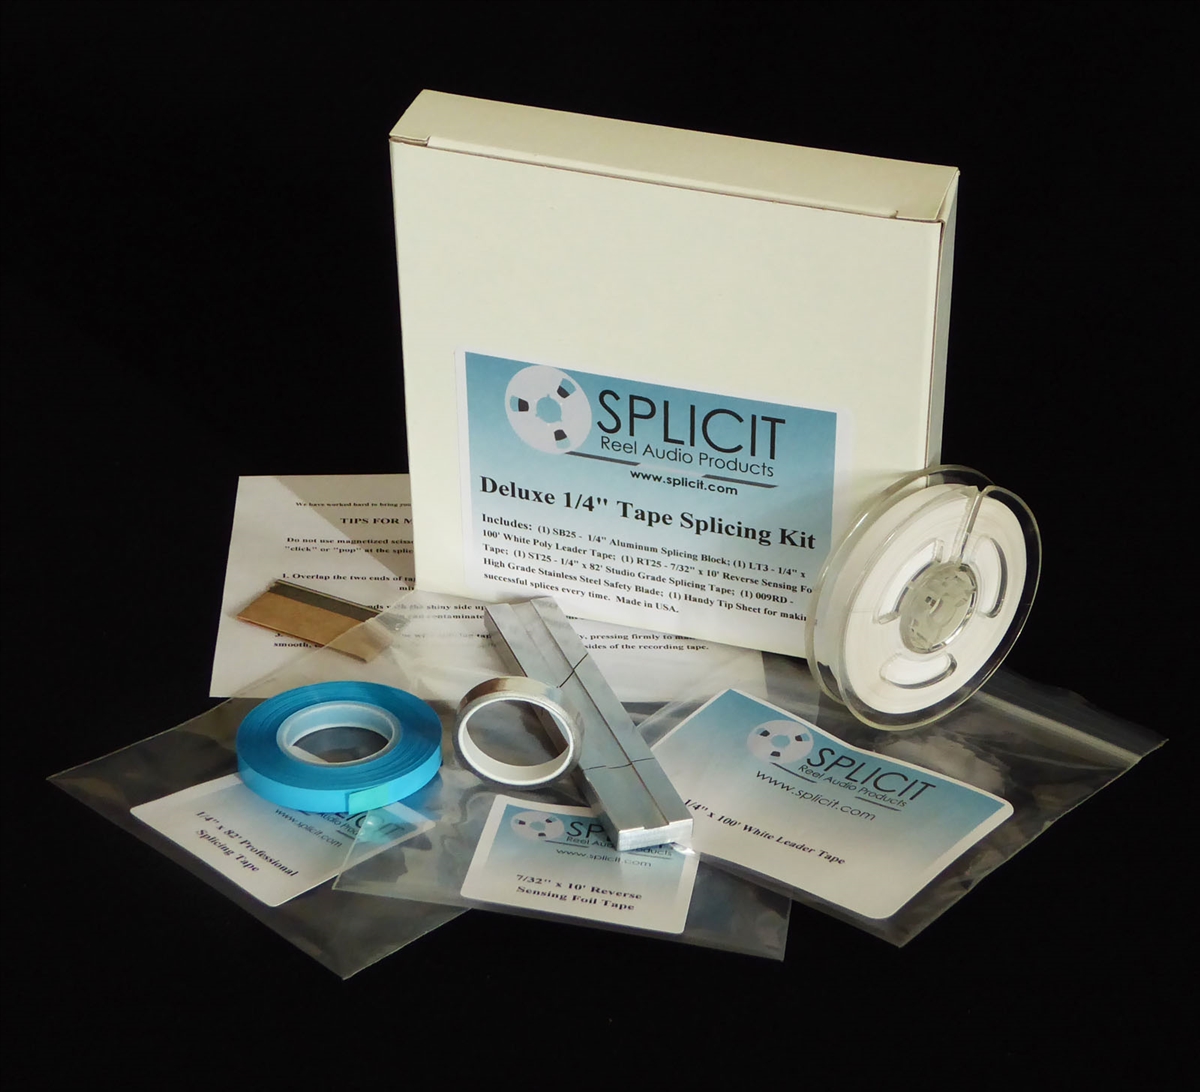 Deluxe 1/4 Splicing Kits